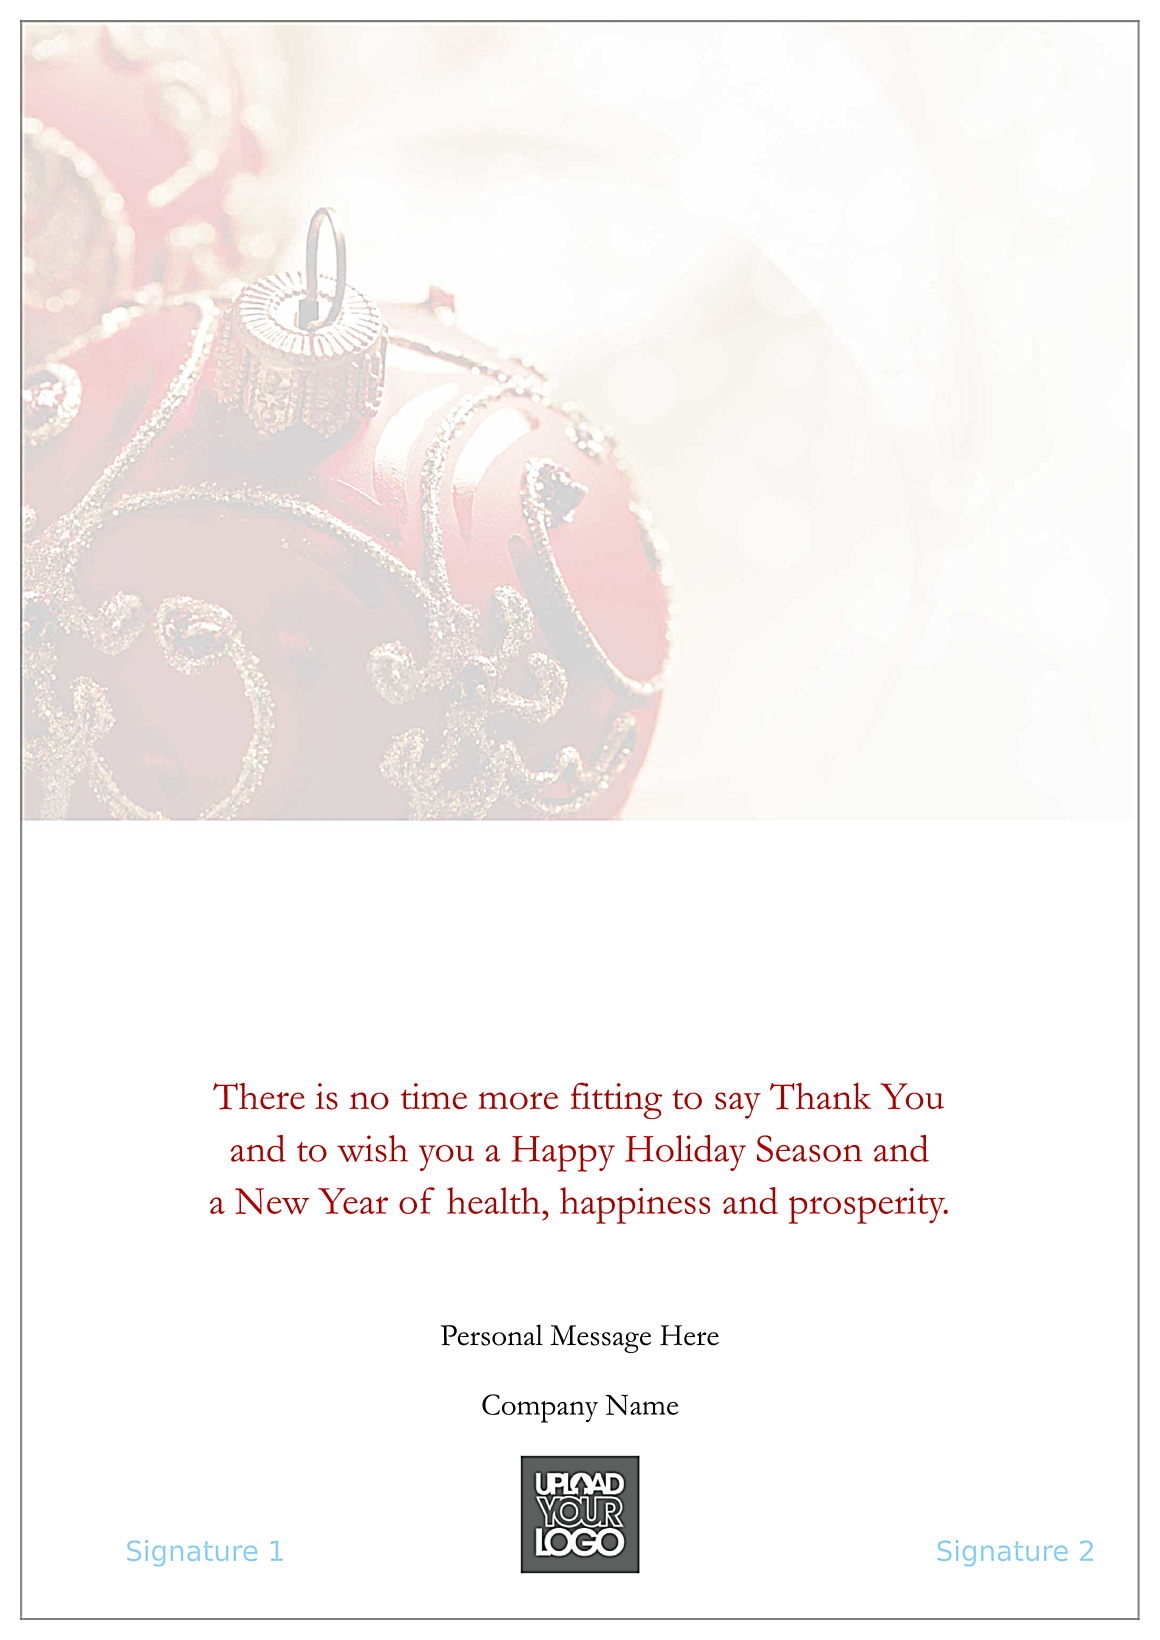 Red Christmas Ornament back - Greeting Cards Maker